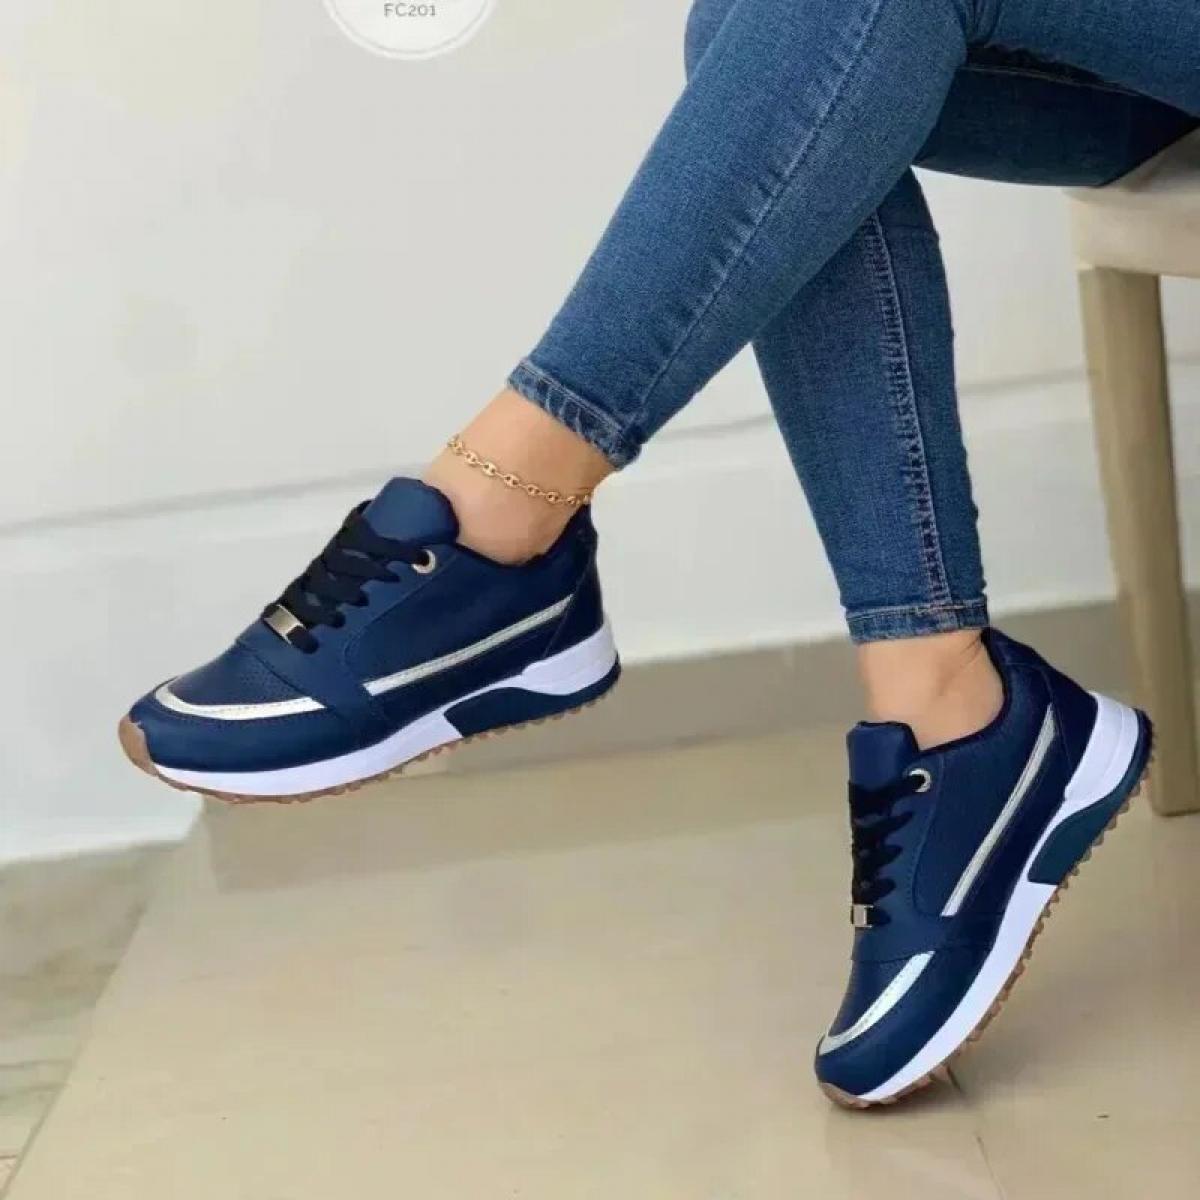 Ladies Sneakers On Sale Fashion Round Toe Flat Platform Shoes Caual Mixed Colors Lace Up Sneakers Outdoor Running Women'